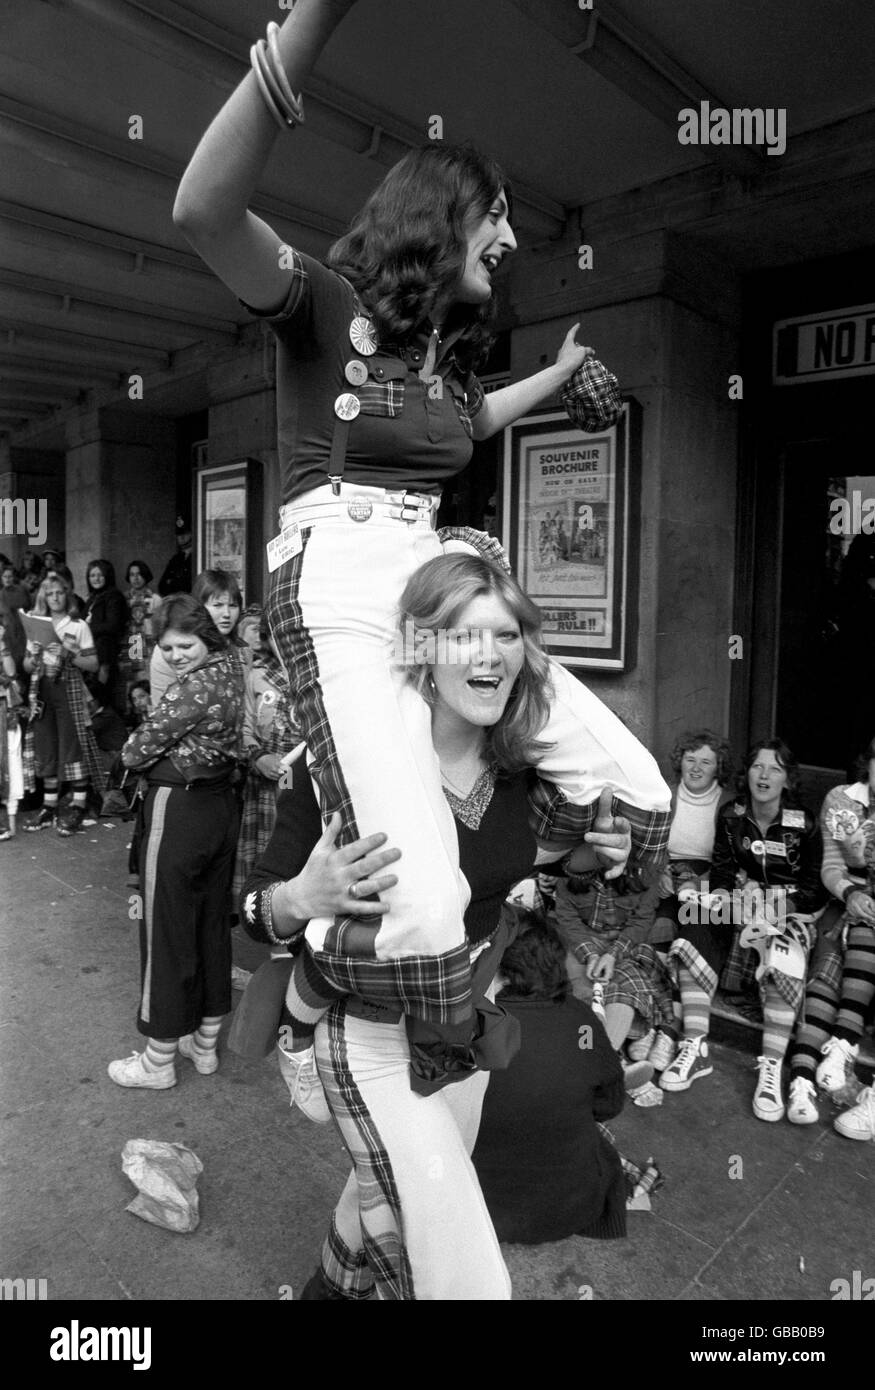 High spirits from two fans of the Bay City Rollers, as they wait with other fans for the doors to open at the Odeon, Hammersmith, for the first of two concerts by the group. Stock Photo